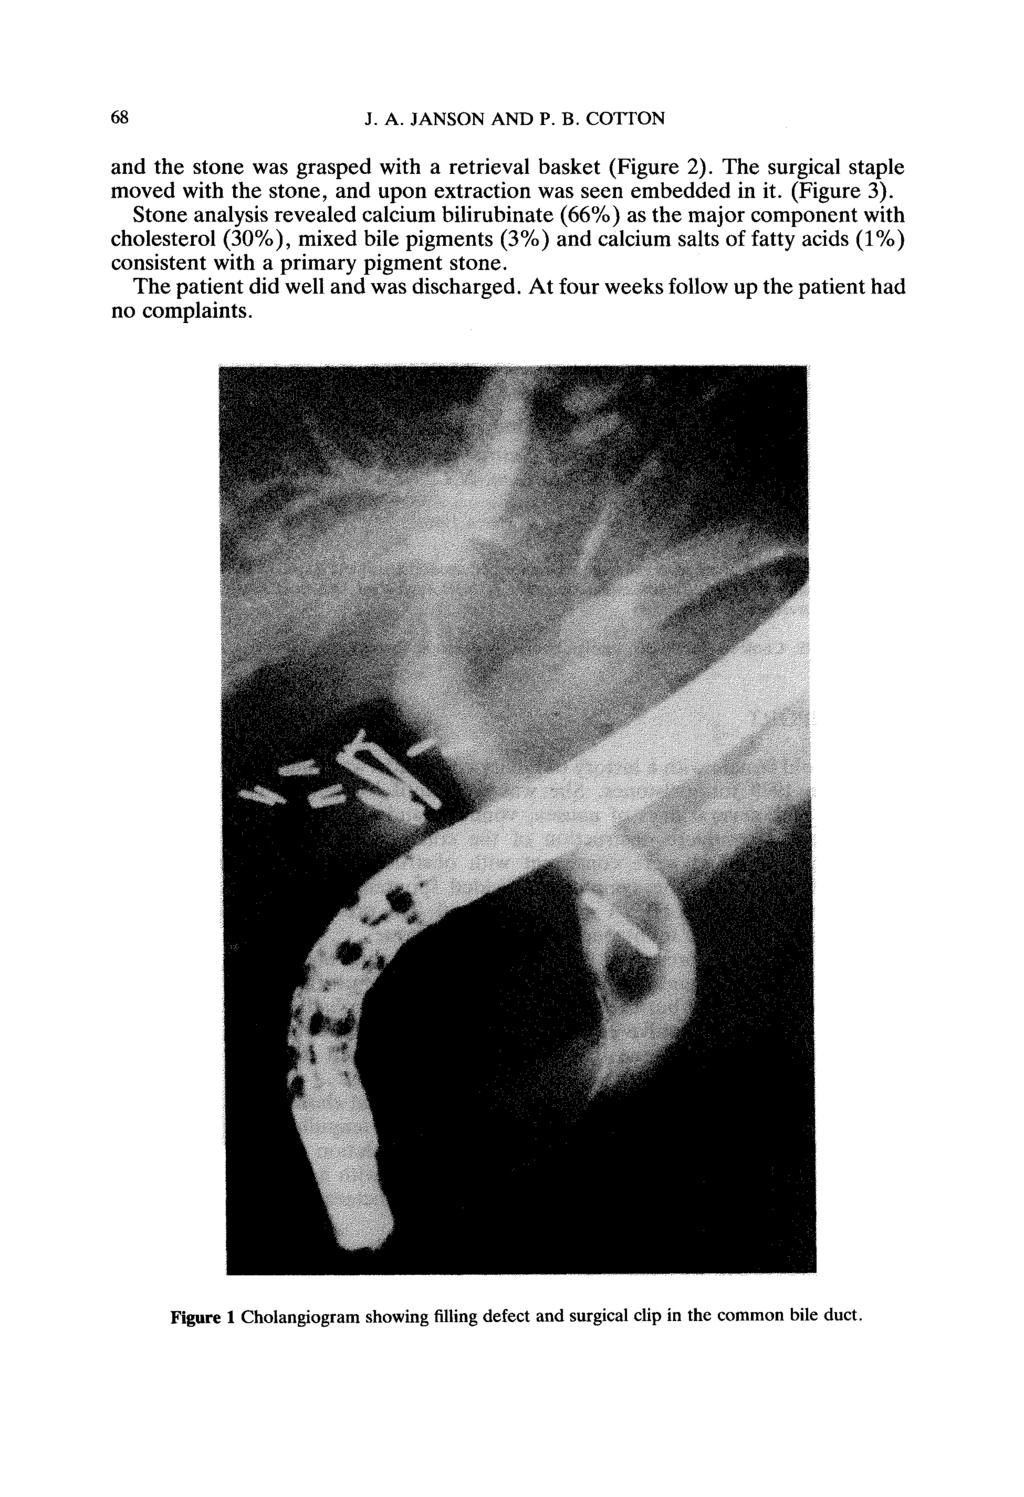 68 J.A. JANSON AND P. B. COTTON and the stone was grasped with a retrieval basket (Figure 2). The surgical staple moved with the stone, and upon extraction was seen embedded in it. (Figure 3).